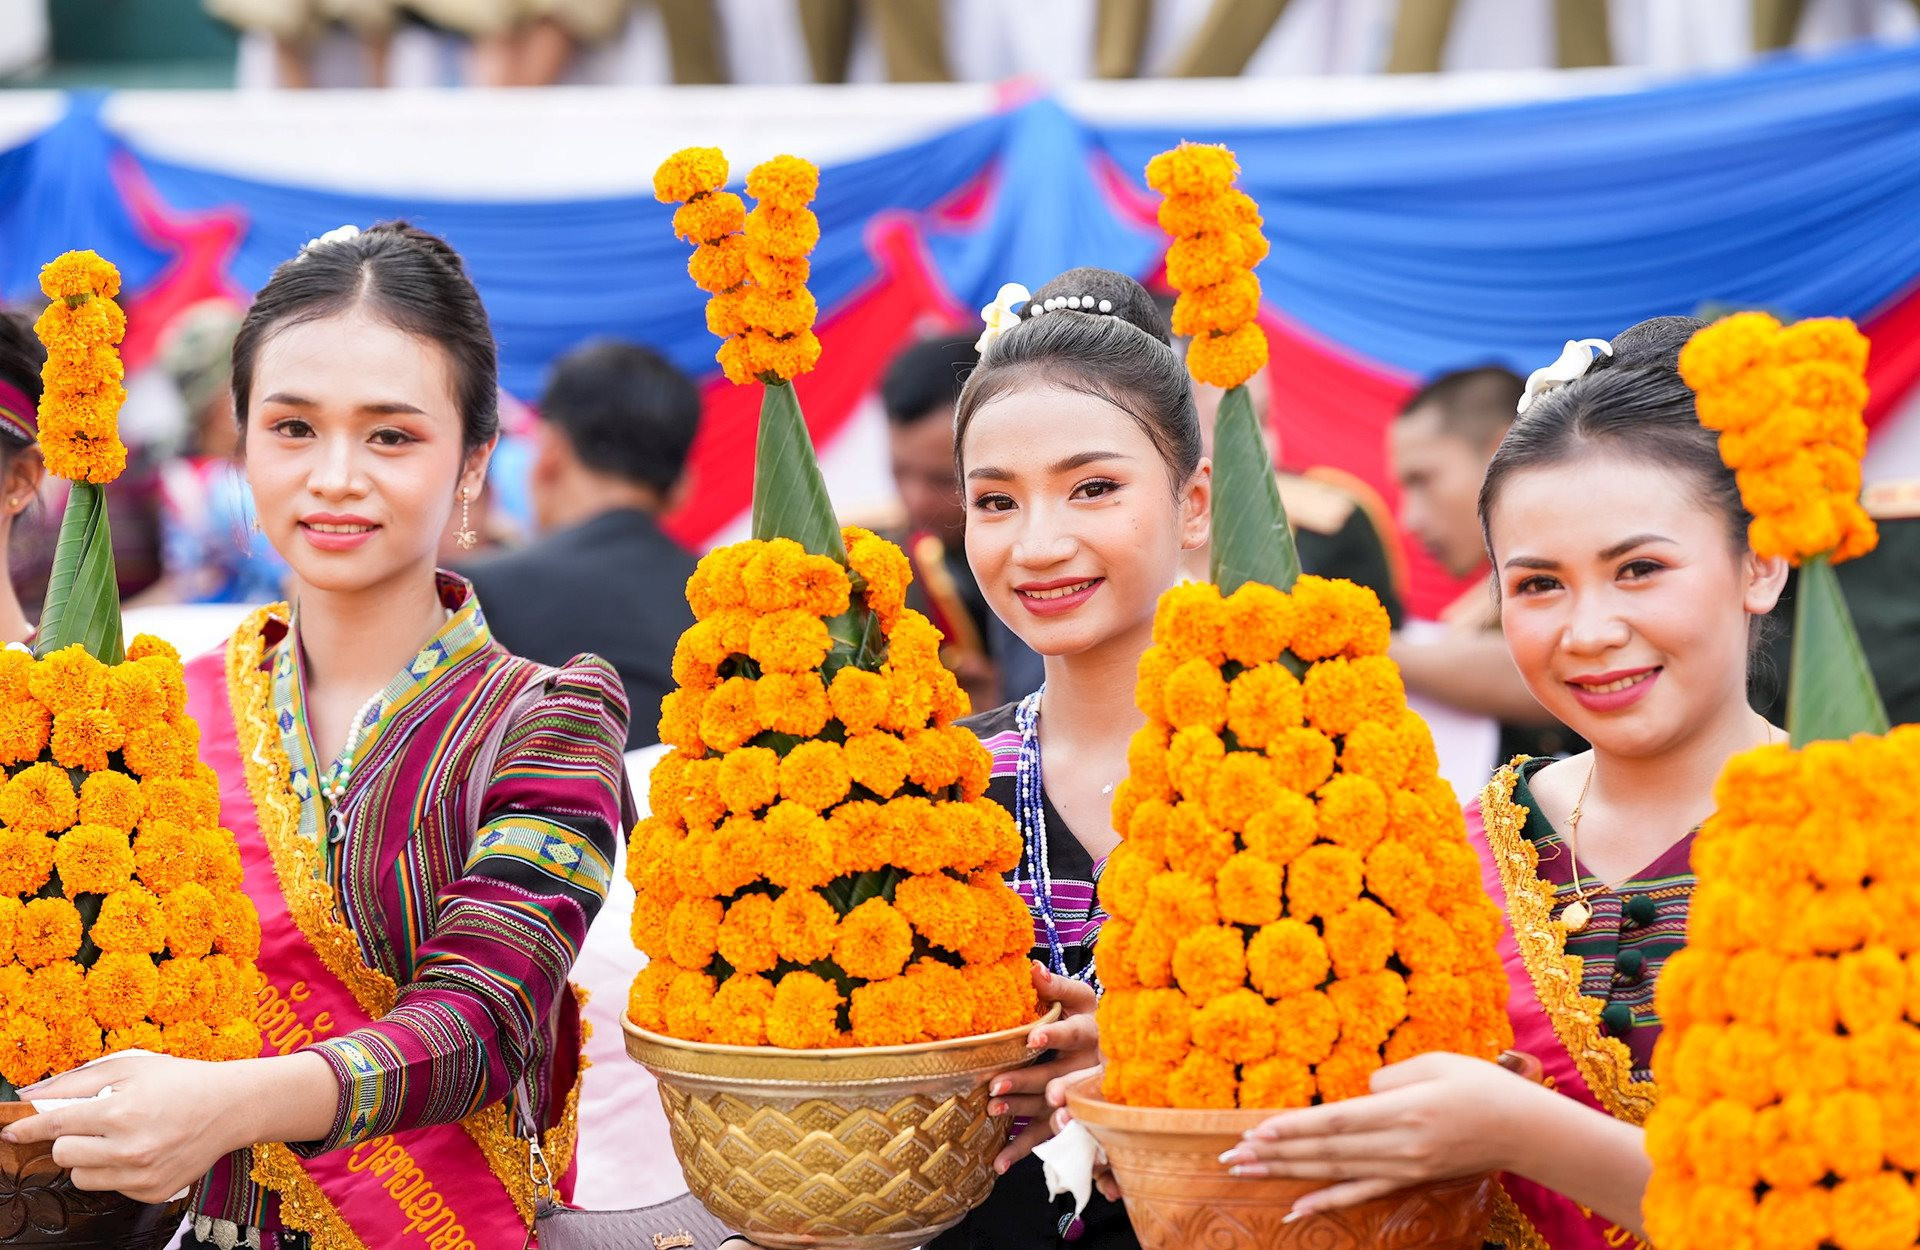 Laotian girls and flowers for the celebration